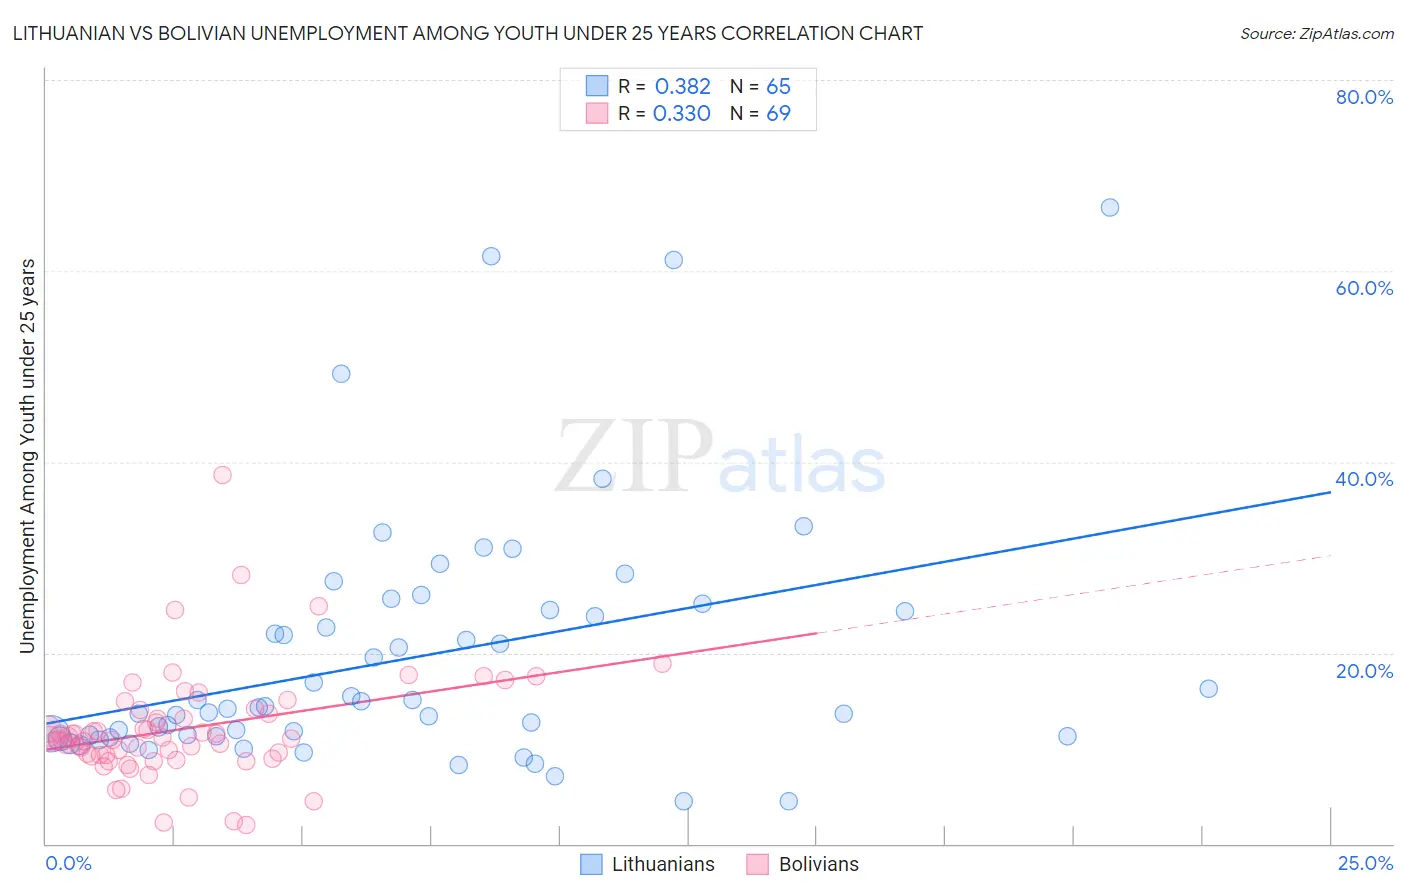 Lithuanian vs Bolivian Unemployment Among Youth under 25 years